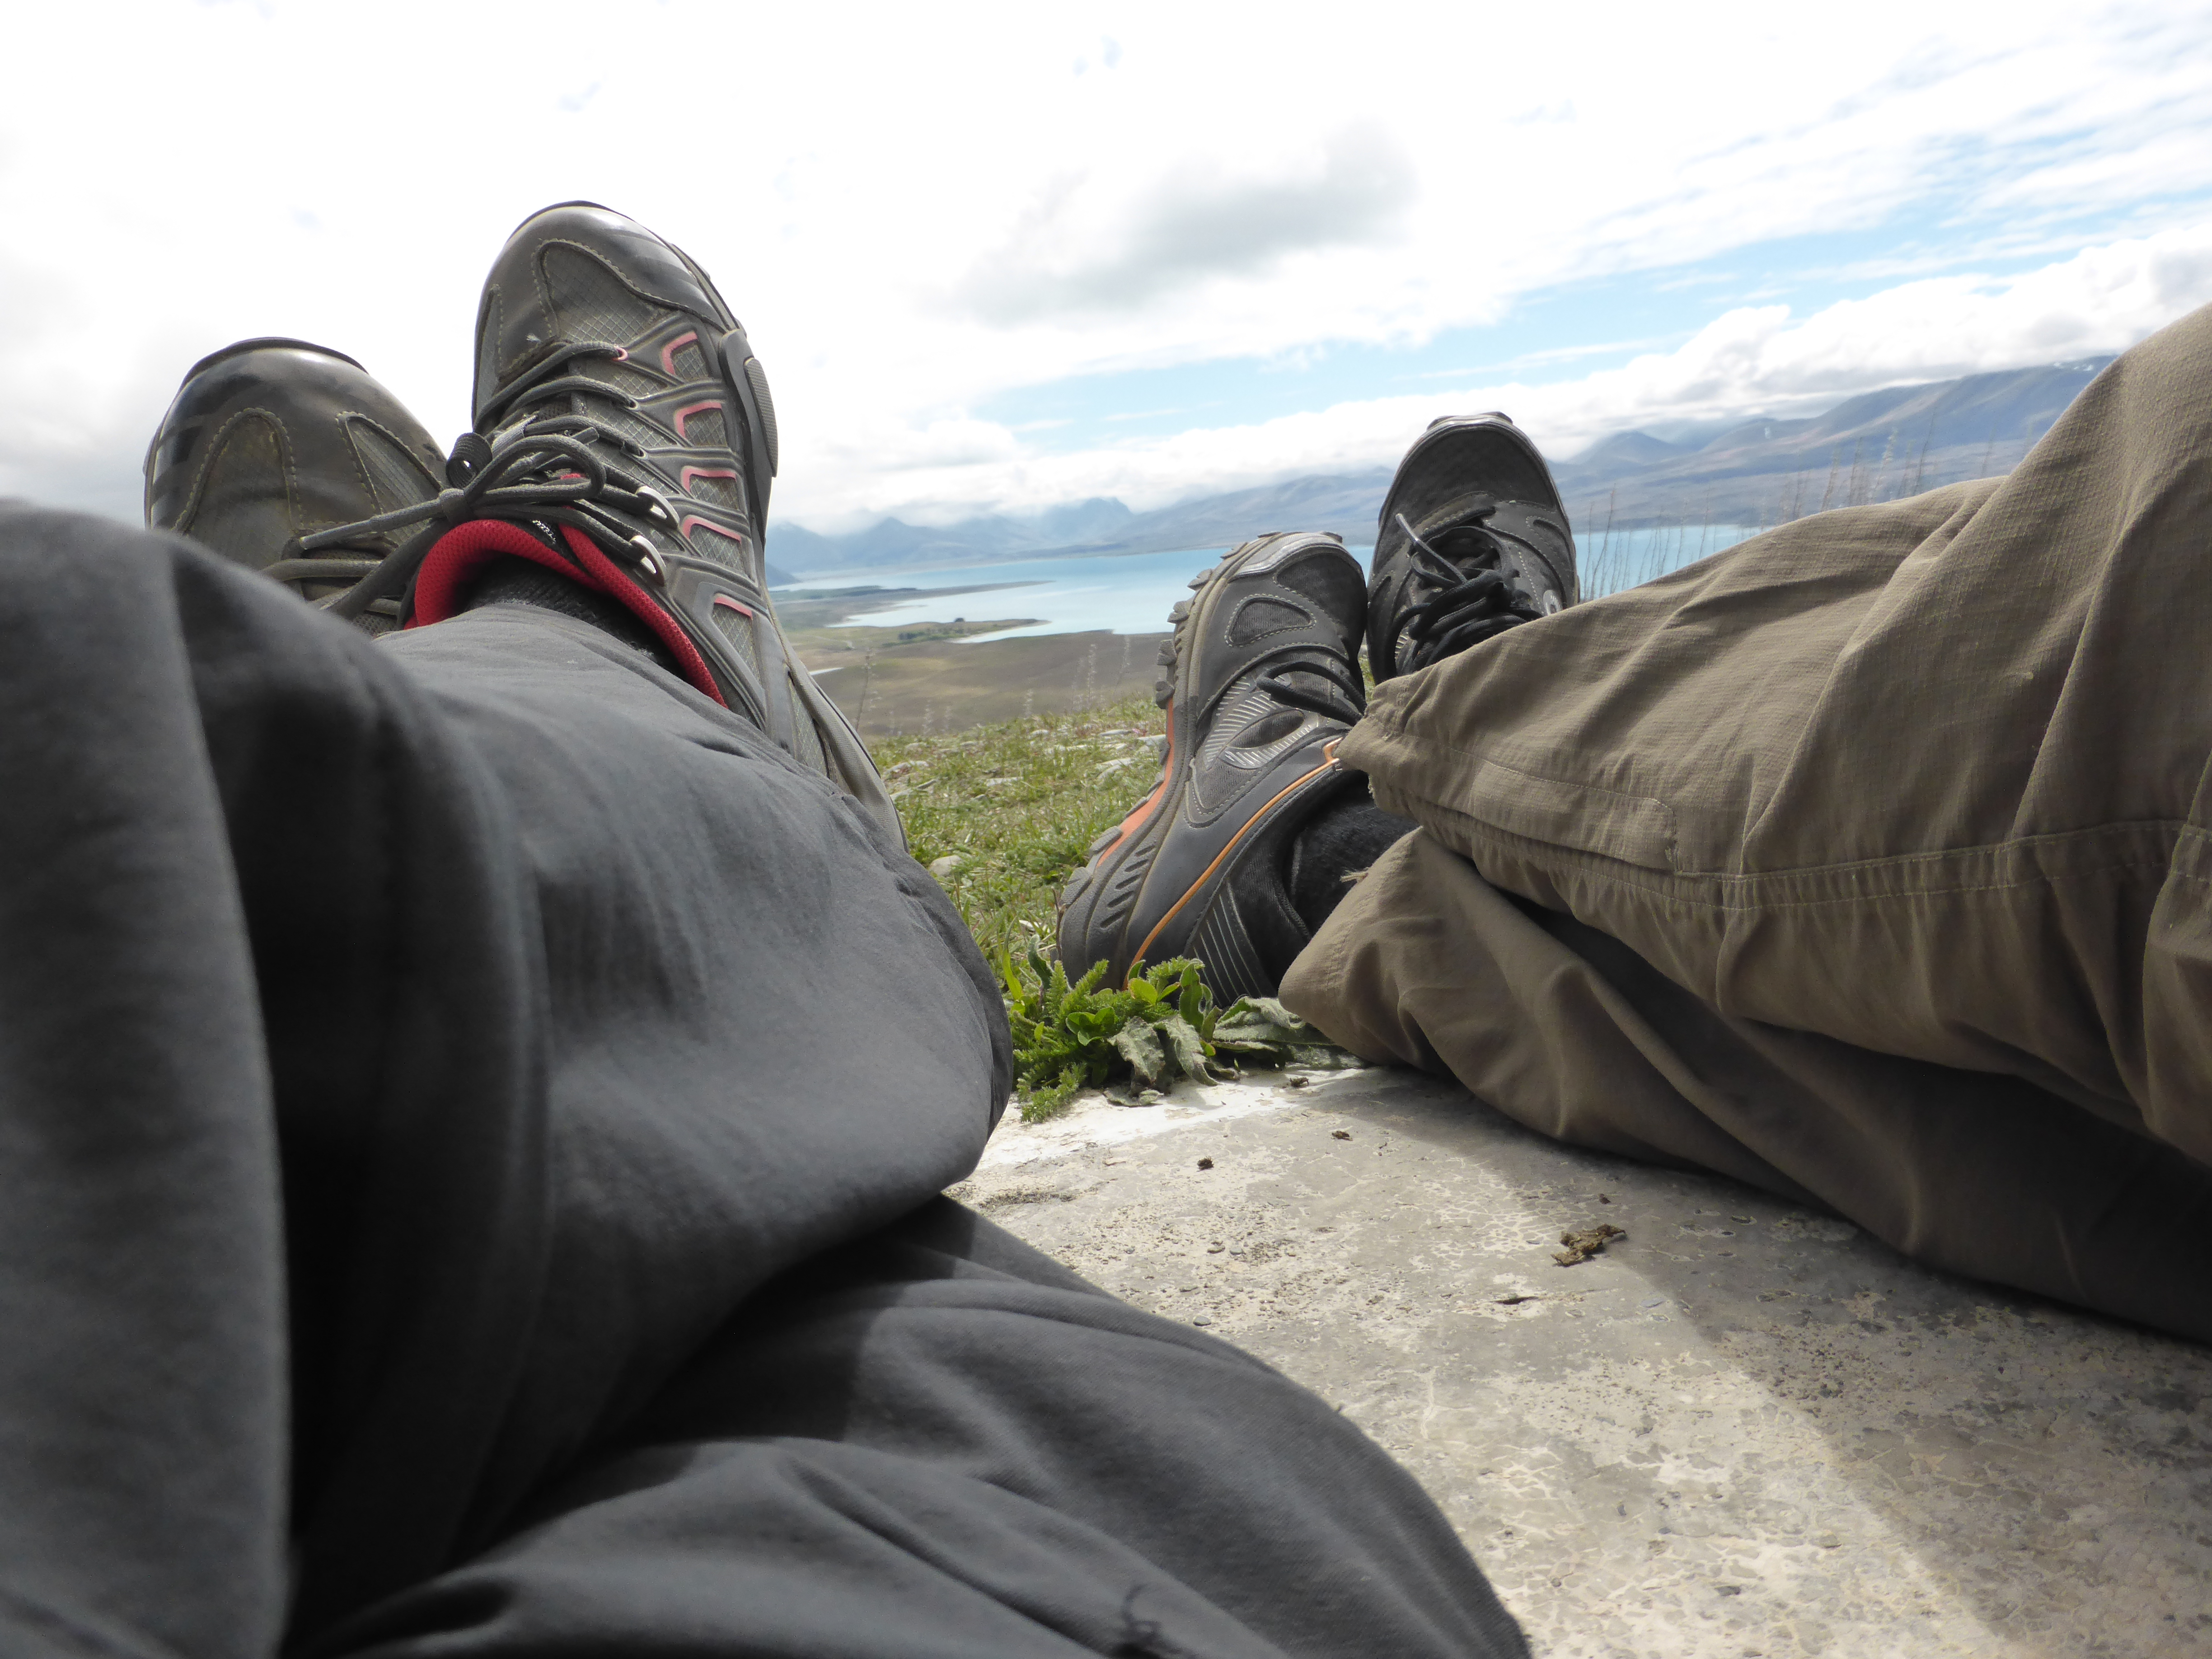 Lake Tekapo in the distance, two sets of legs and shoes in the foreground